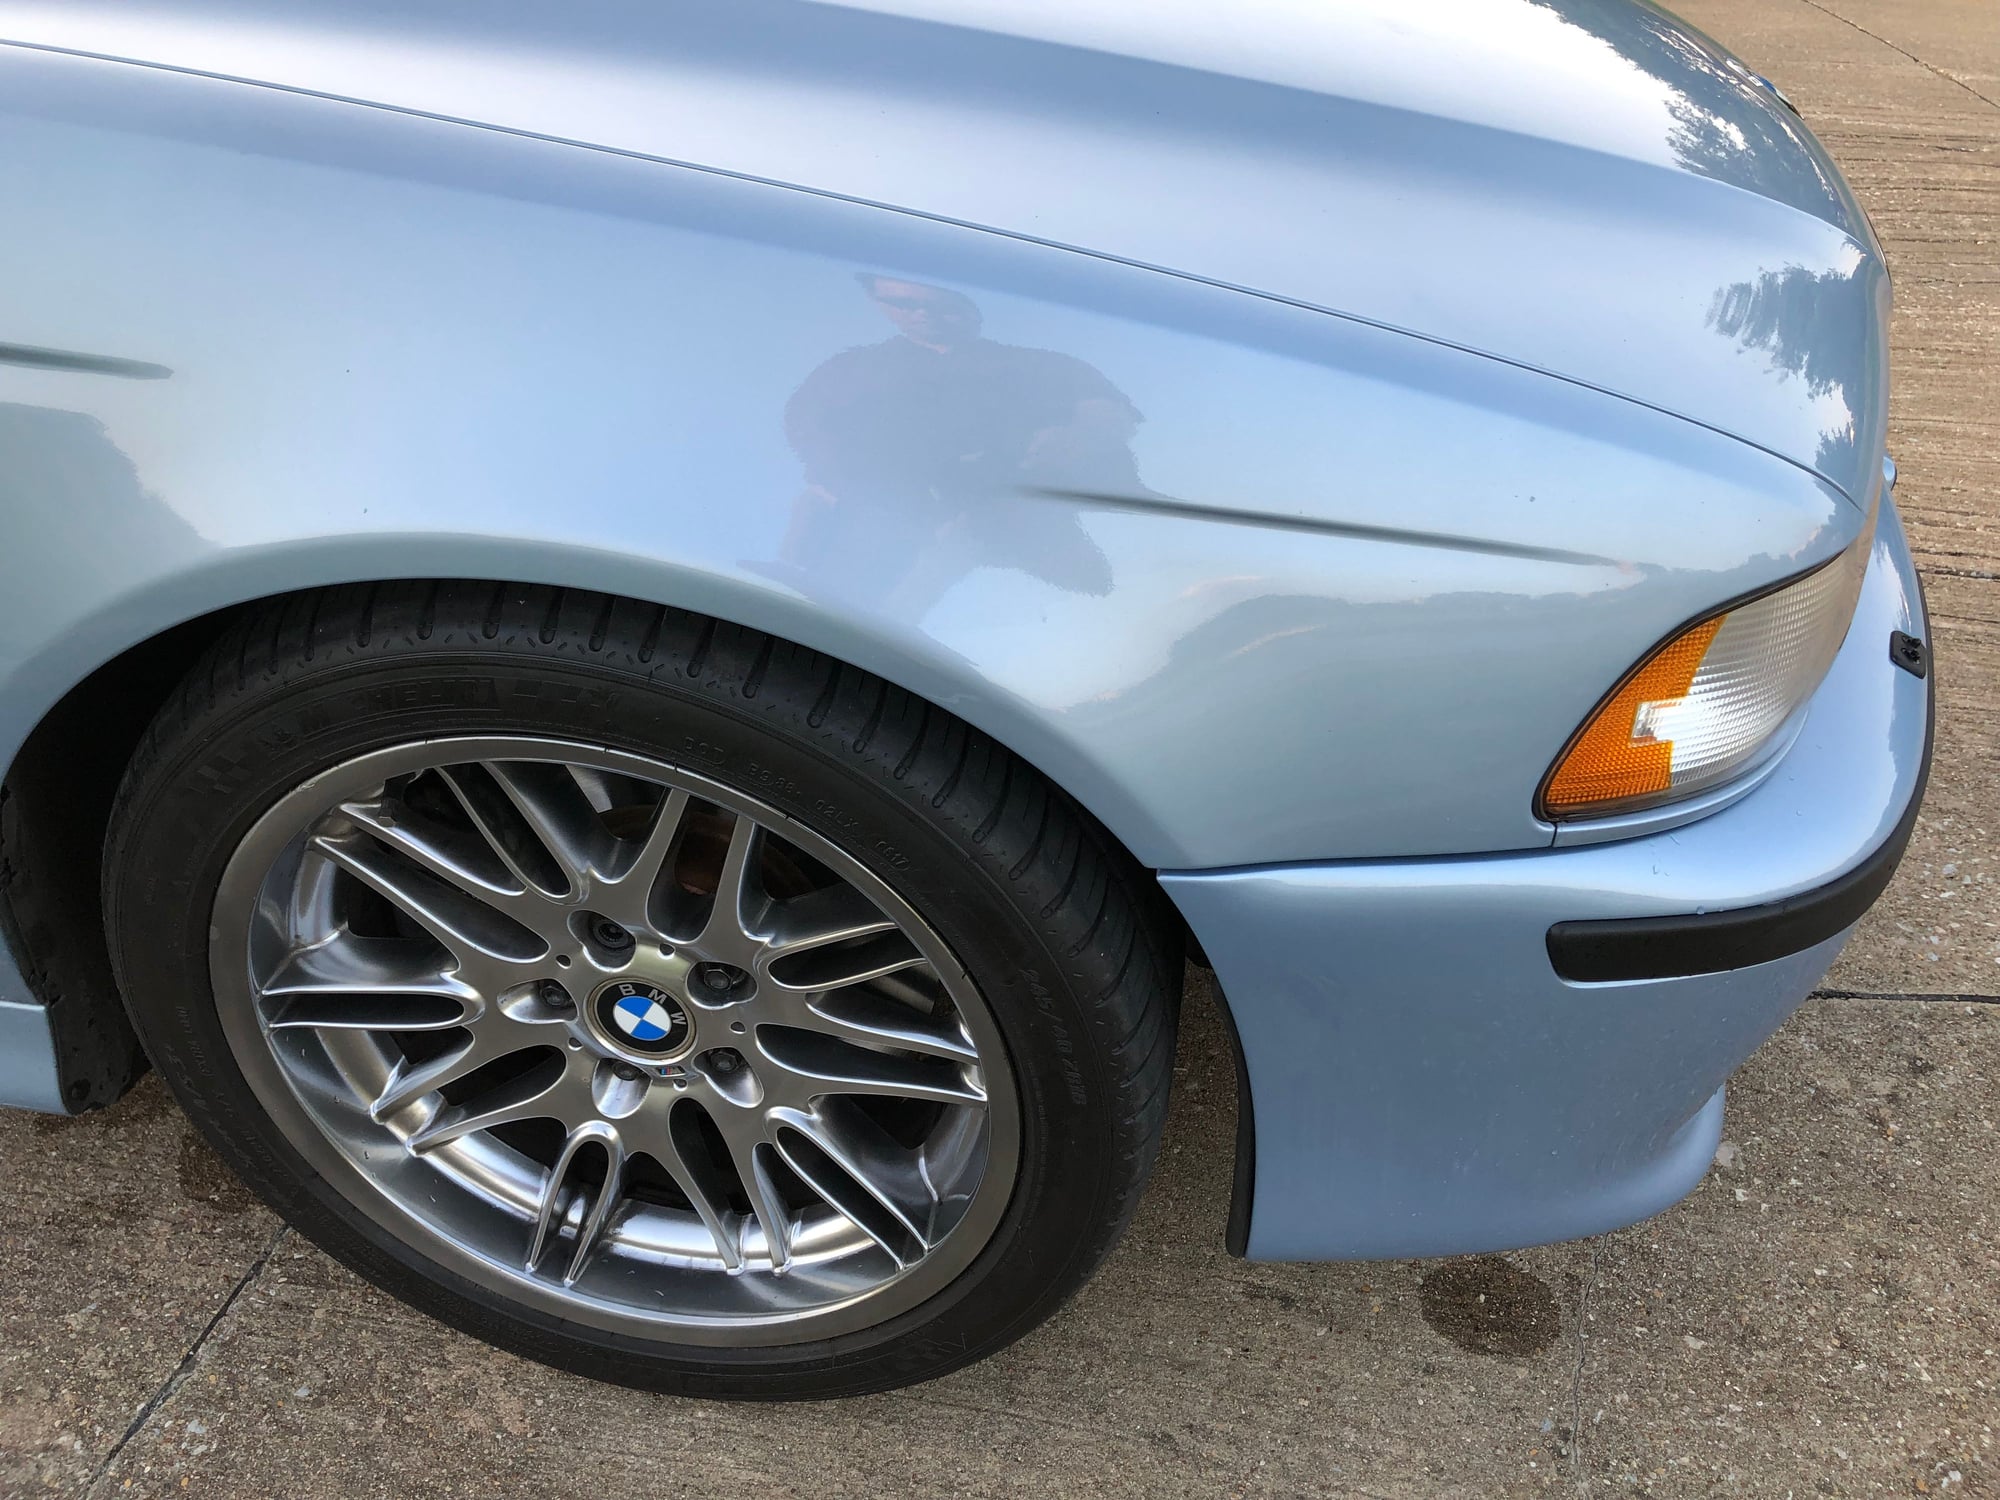 2000 BMW M5 - Bmw m5 e39 - Used - VIN Wbsde9343ybz96134 - 83,000 Miles - 8 cyl - 2WD - Sedan - Other - Irving, TX 75038, United States